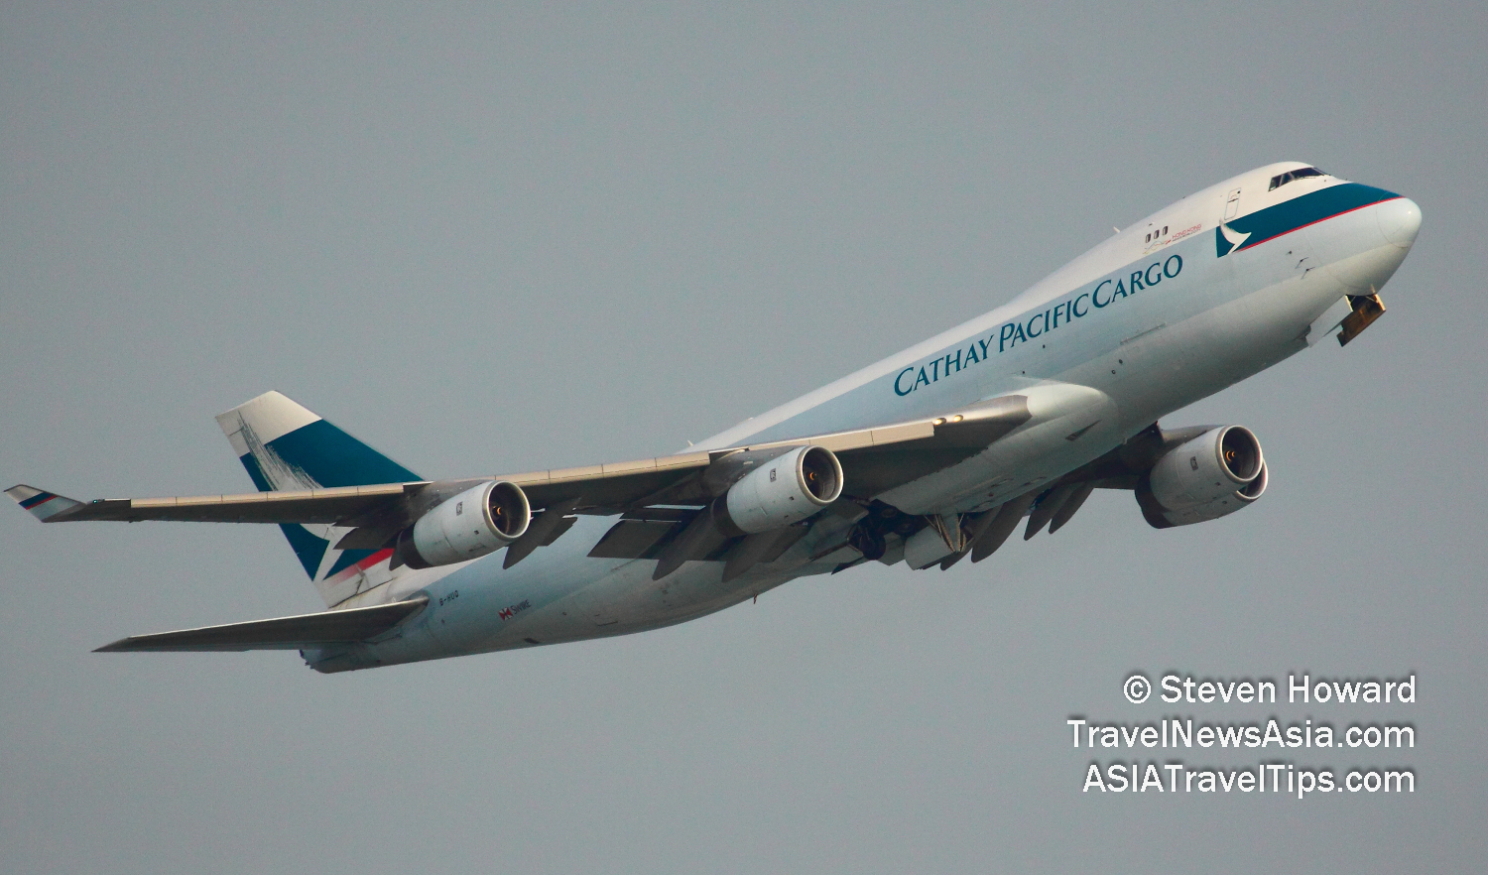 Cathay Pacific Cargo Boeing 747F. Picture by Steven Howard of TravelNewsAsia.com Click to enlarge.